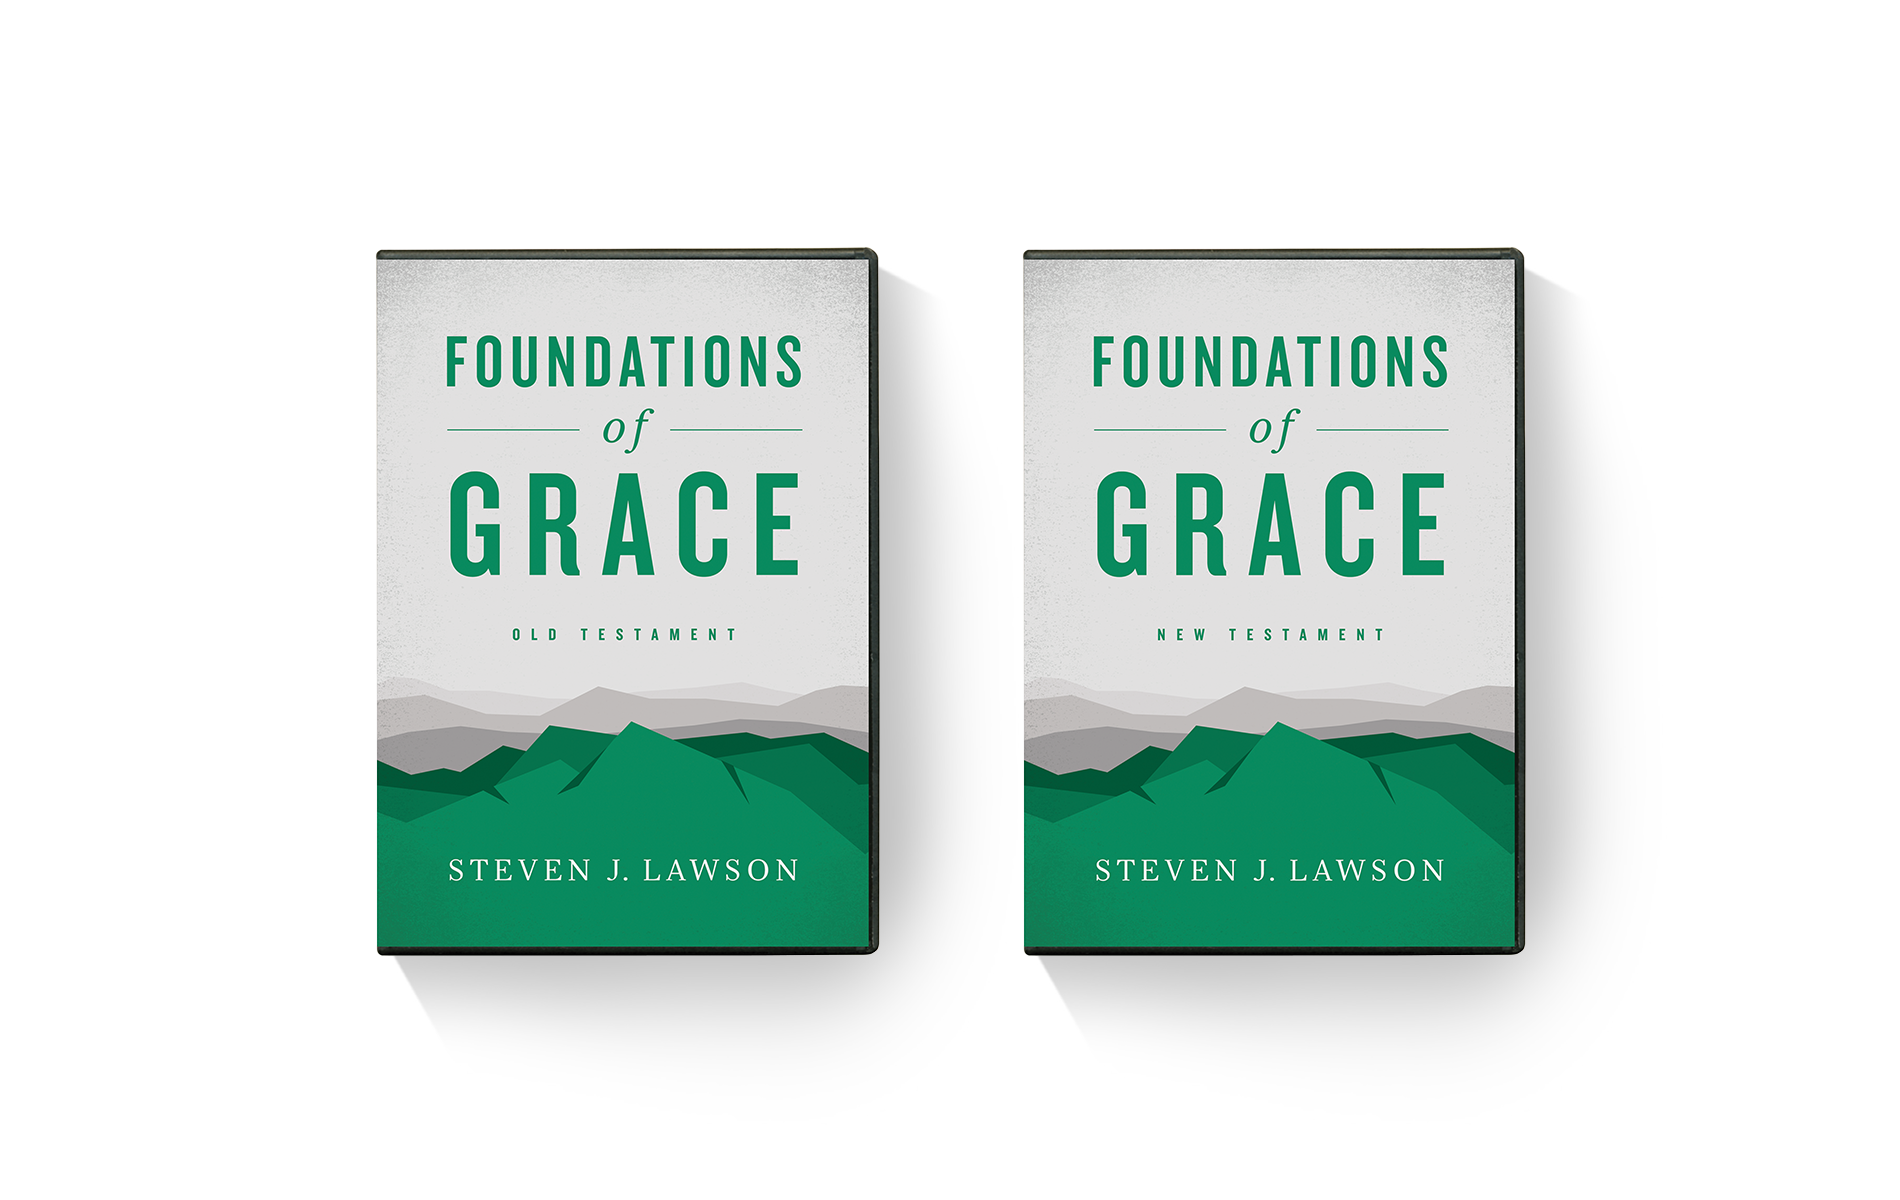 Foundations of Grace: New Testament